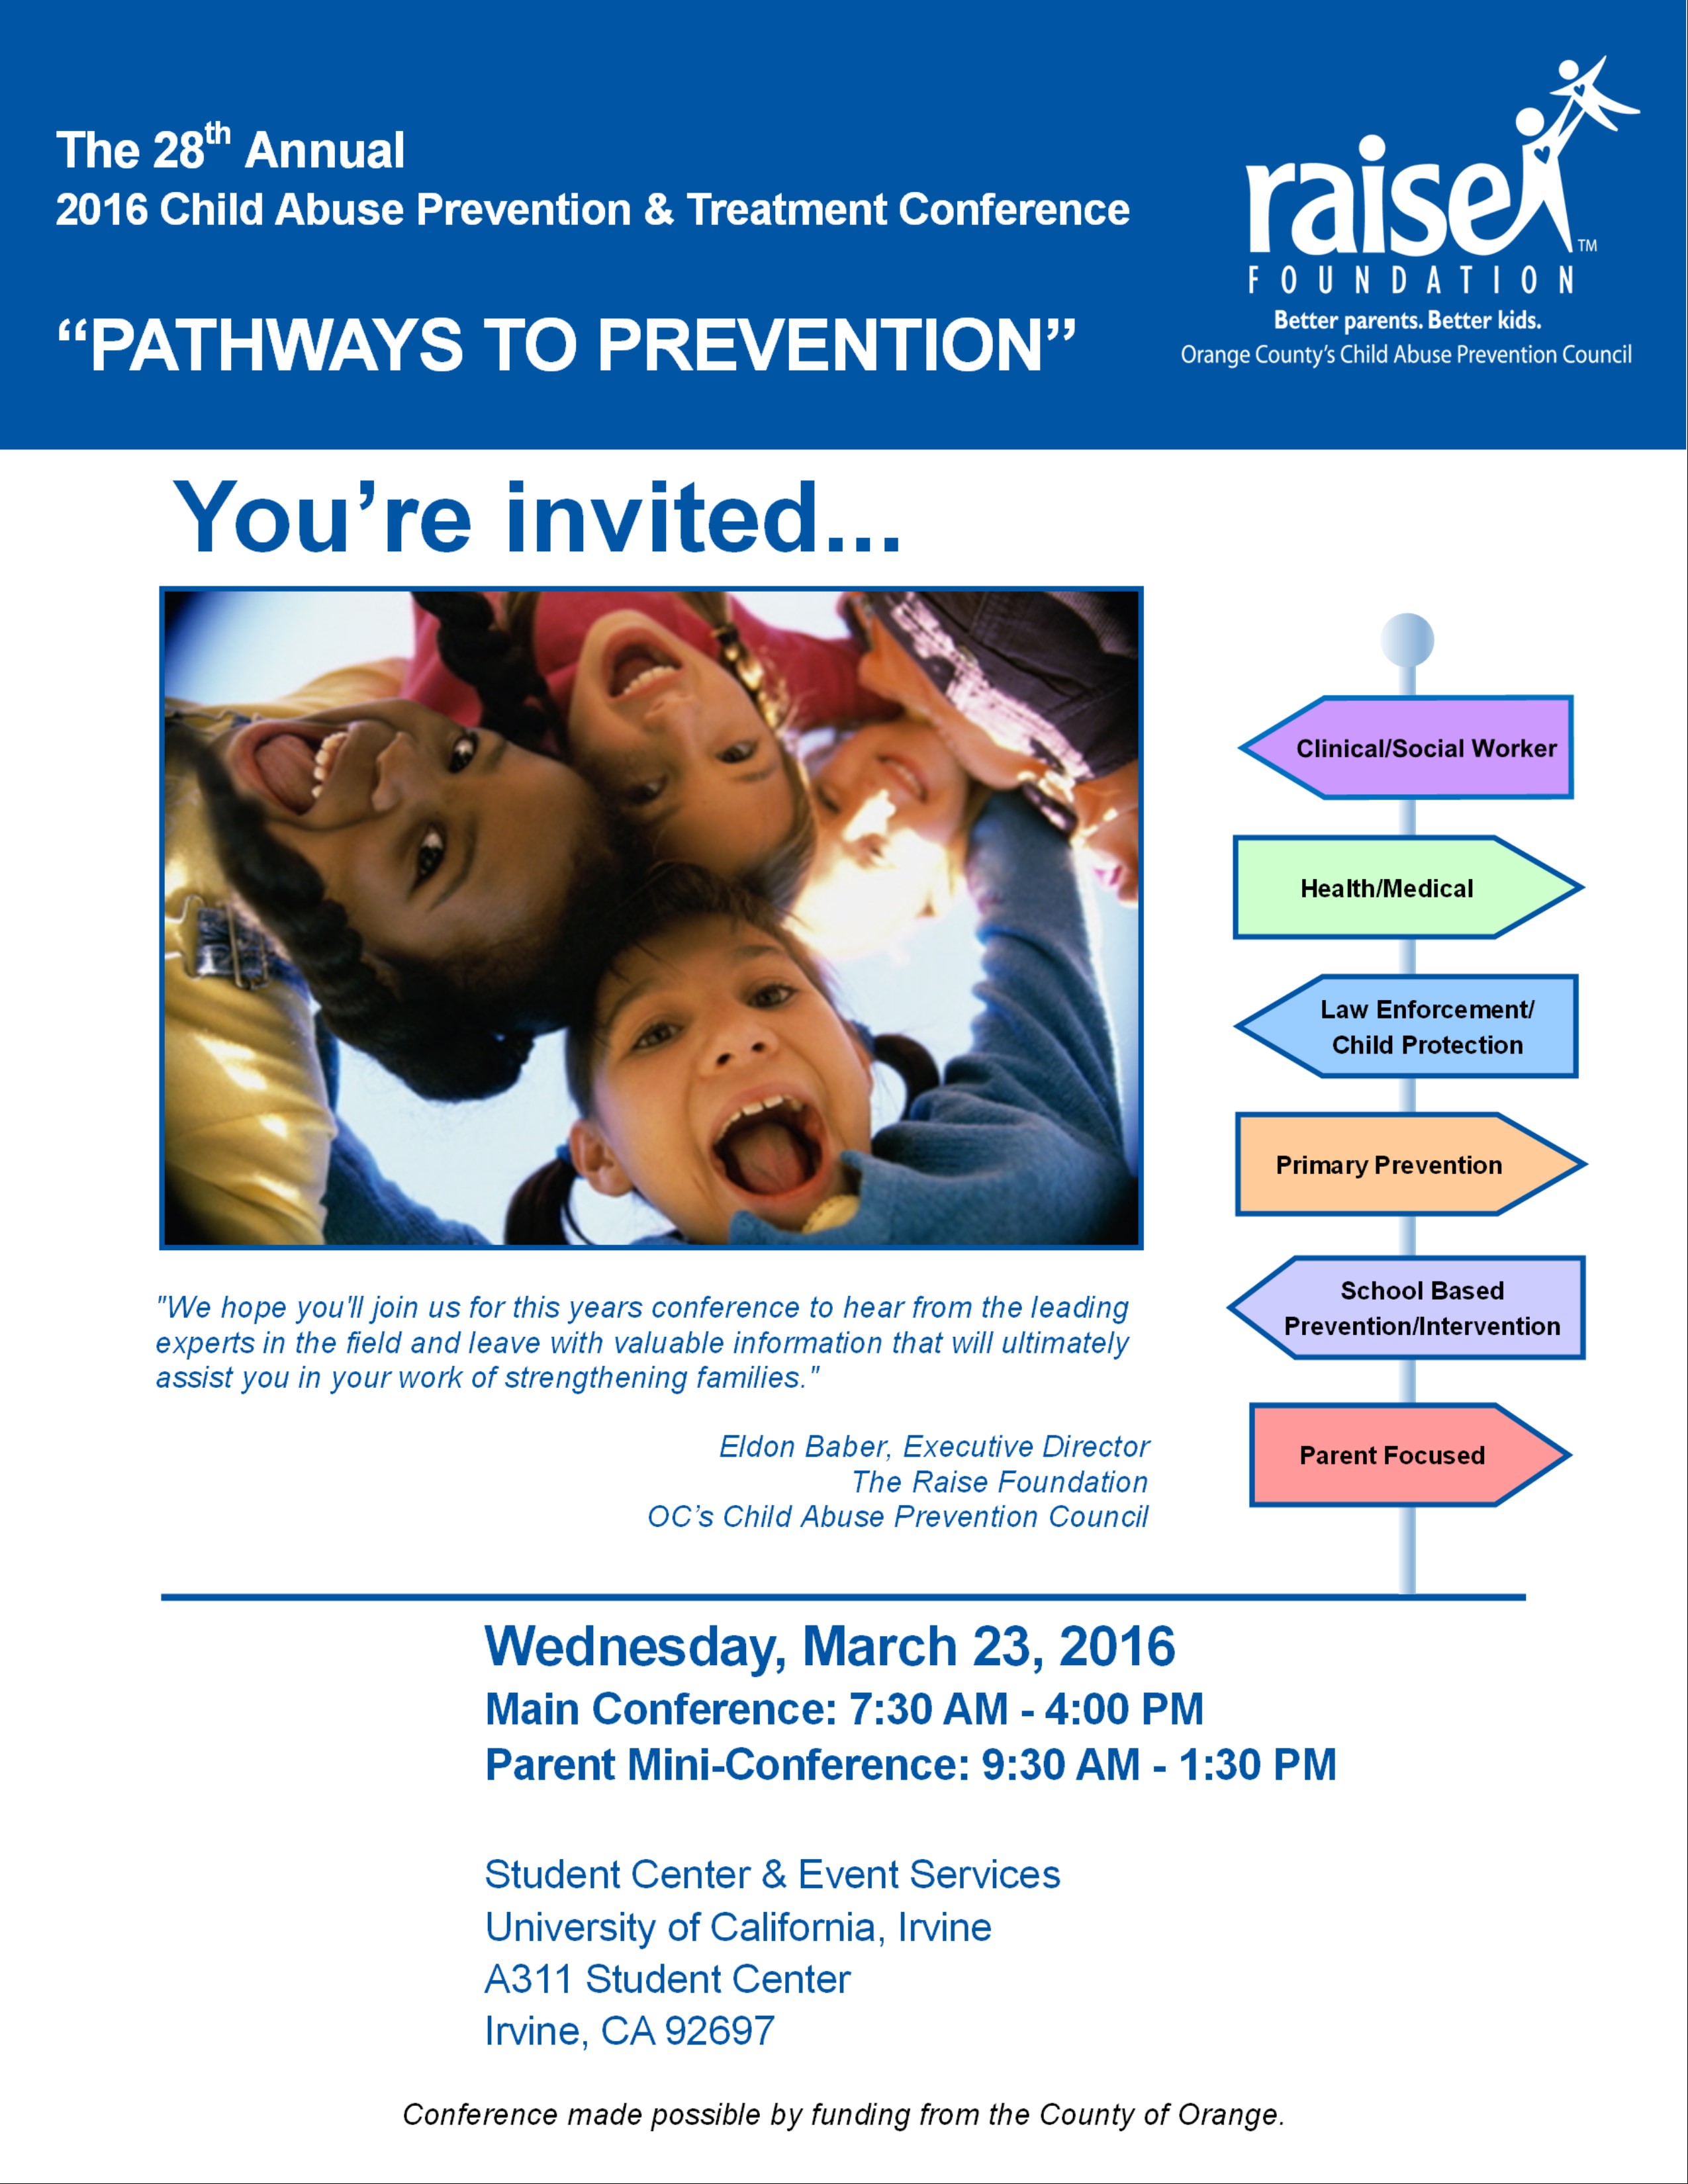 An image of a flier for the 28th annual Child Abuse Prevention & Treatment Conference